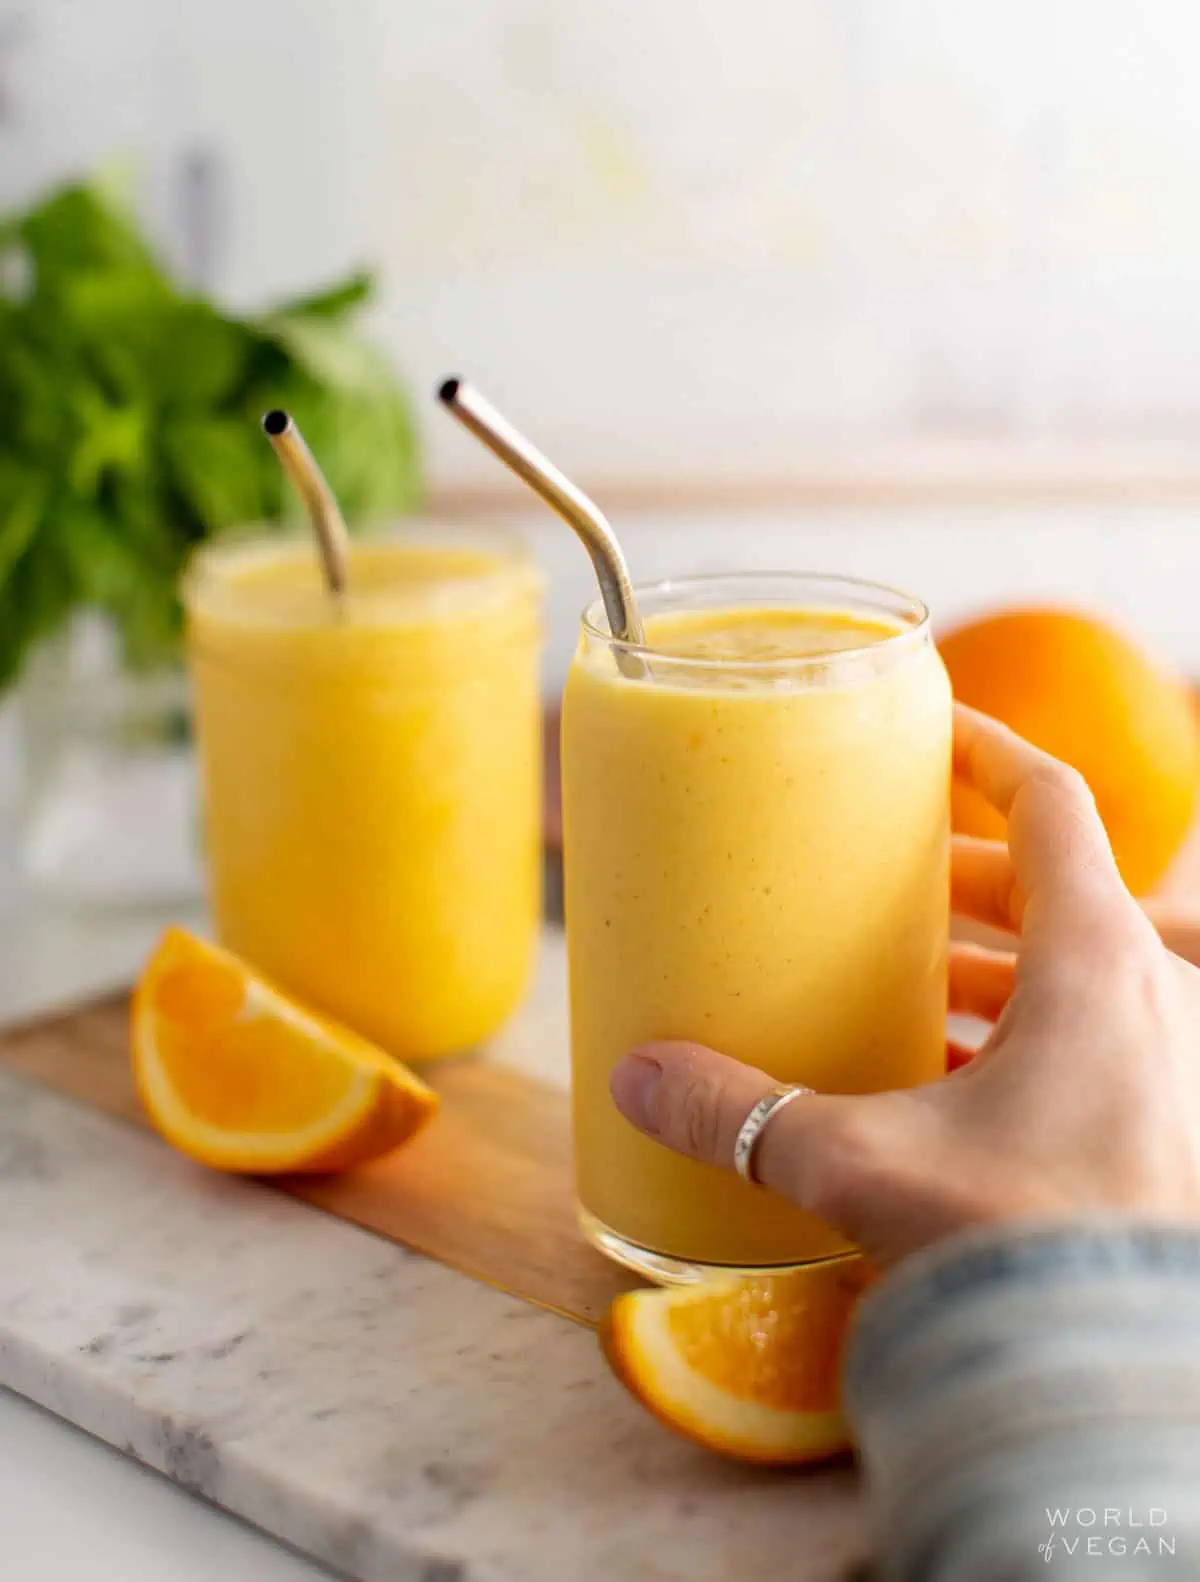 A hand reaching for an orange juice smoothie.